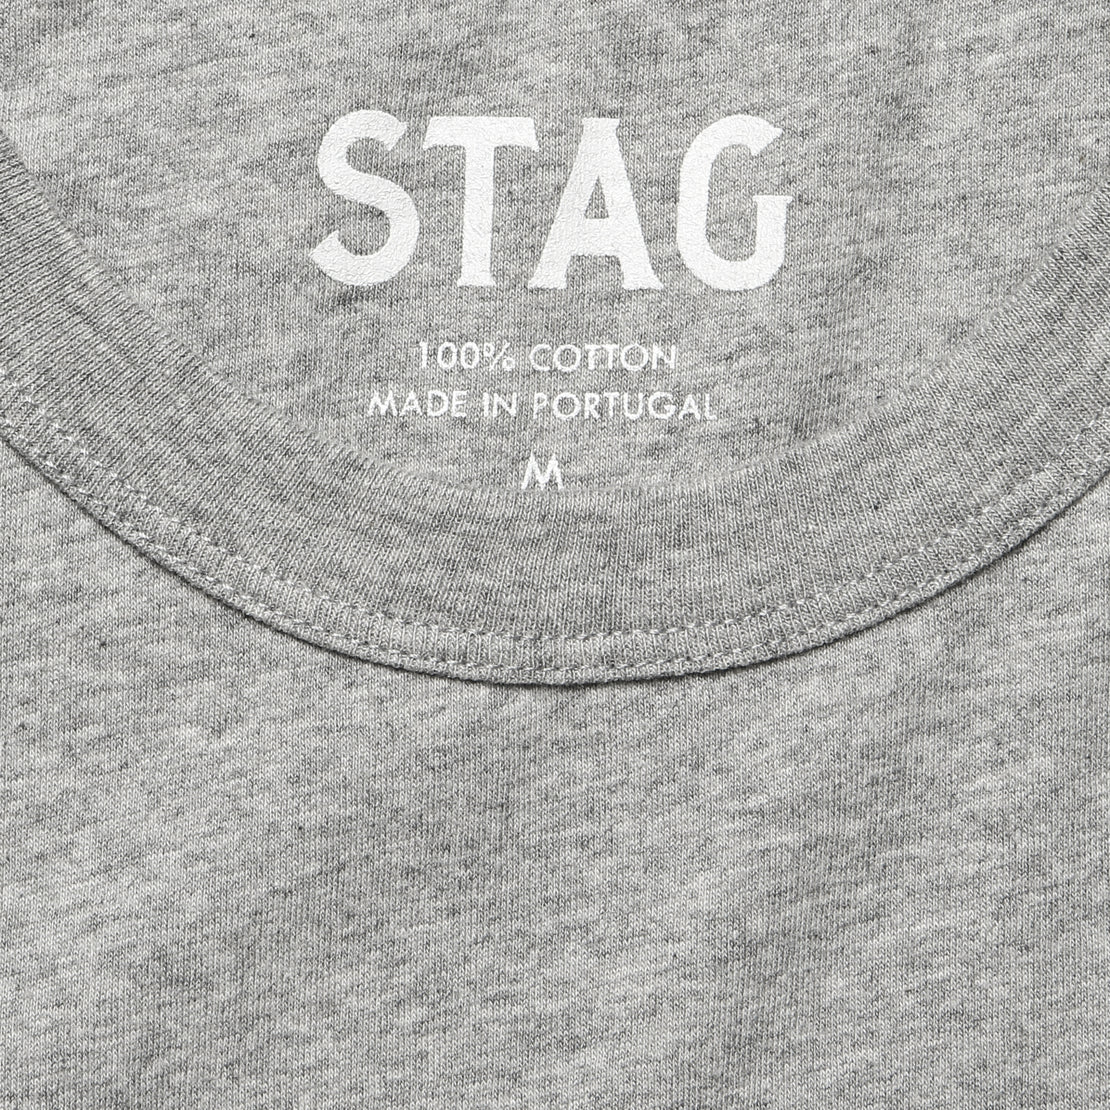 STAG Tee - Grey - STAG - STAG Provisions - Tops - S/S Tee